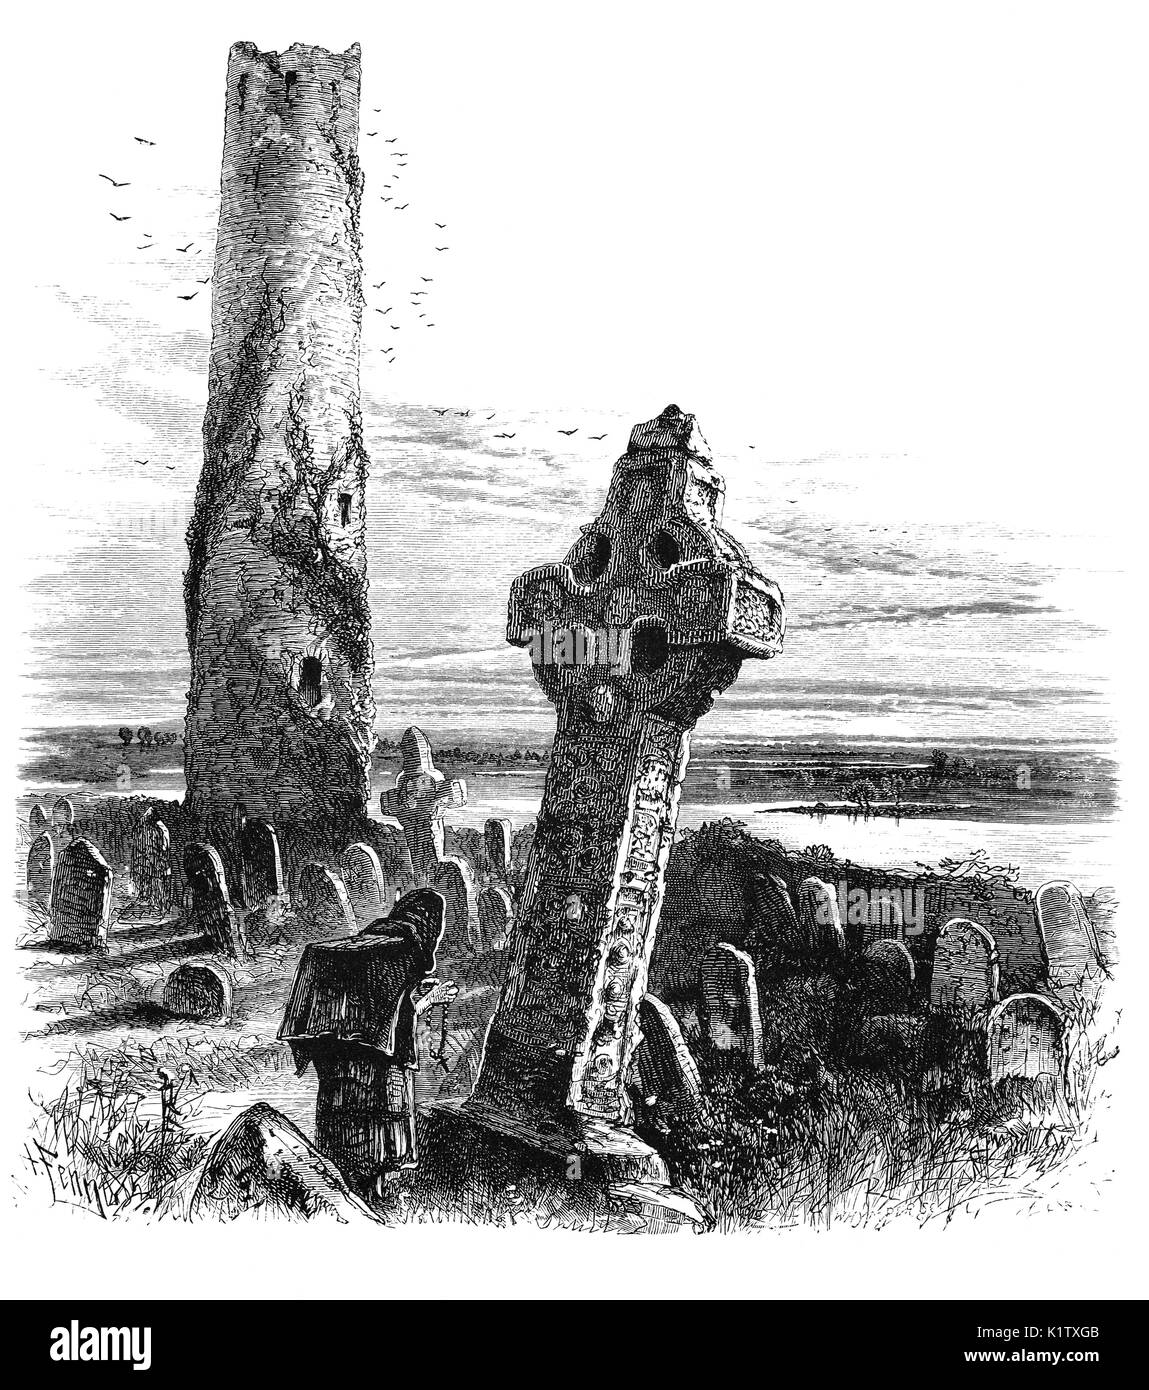 1870: An ancient round tower and high cross overlooking the River Shannon,from Saint Kieron's 6th Century monastic site at Clonmacnoise, County Offaly, Ireland Stock Photo